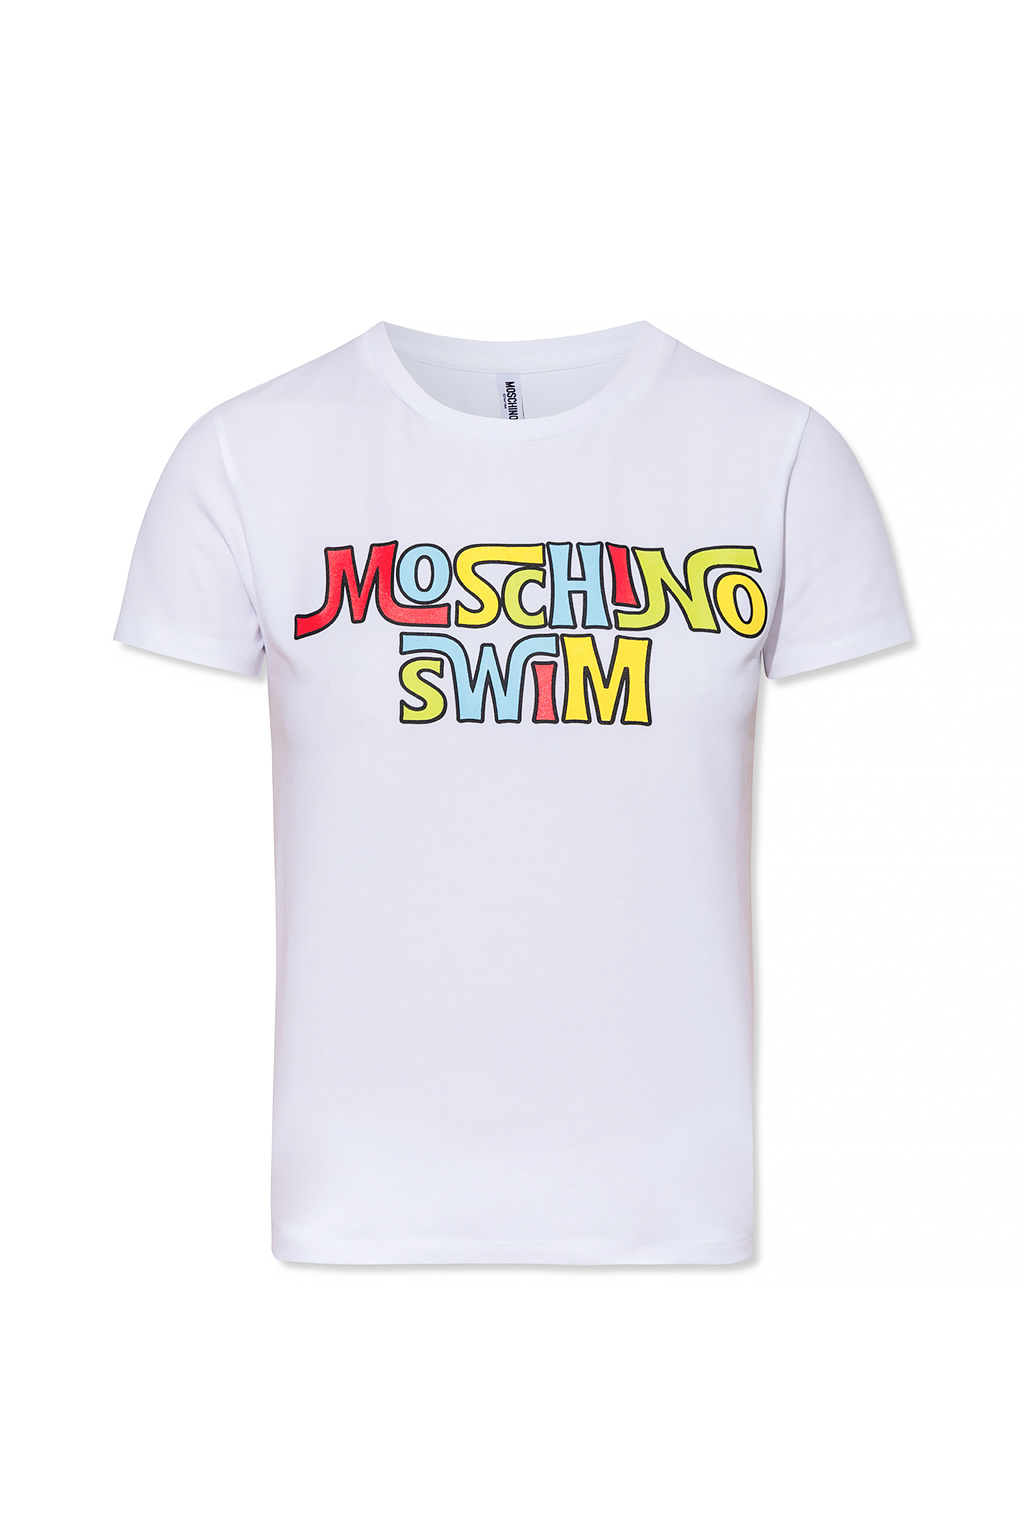 Moschino clothing caps robes Fragrance Kids